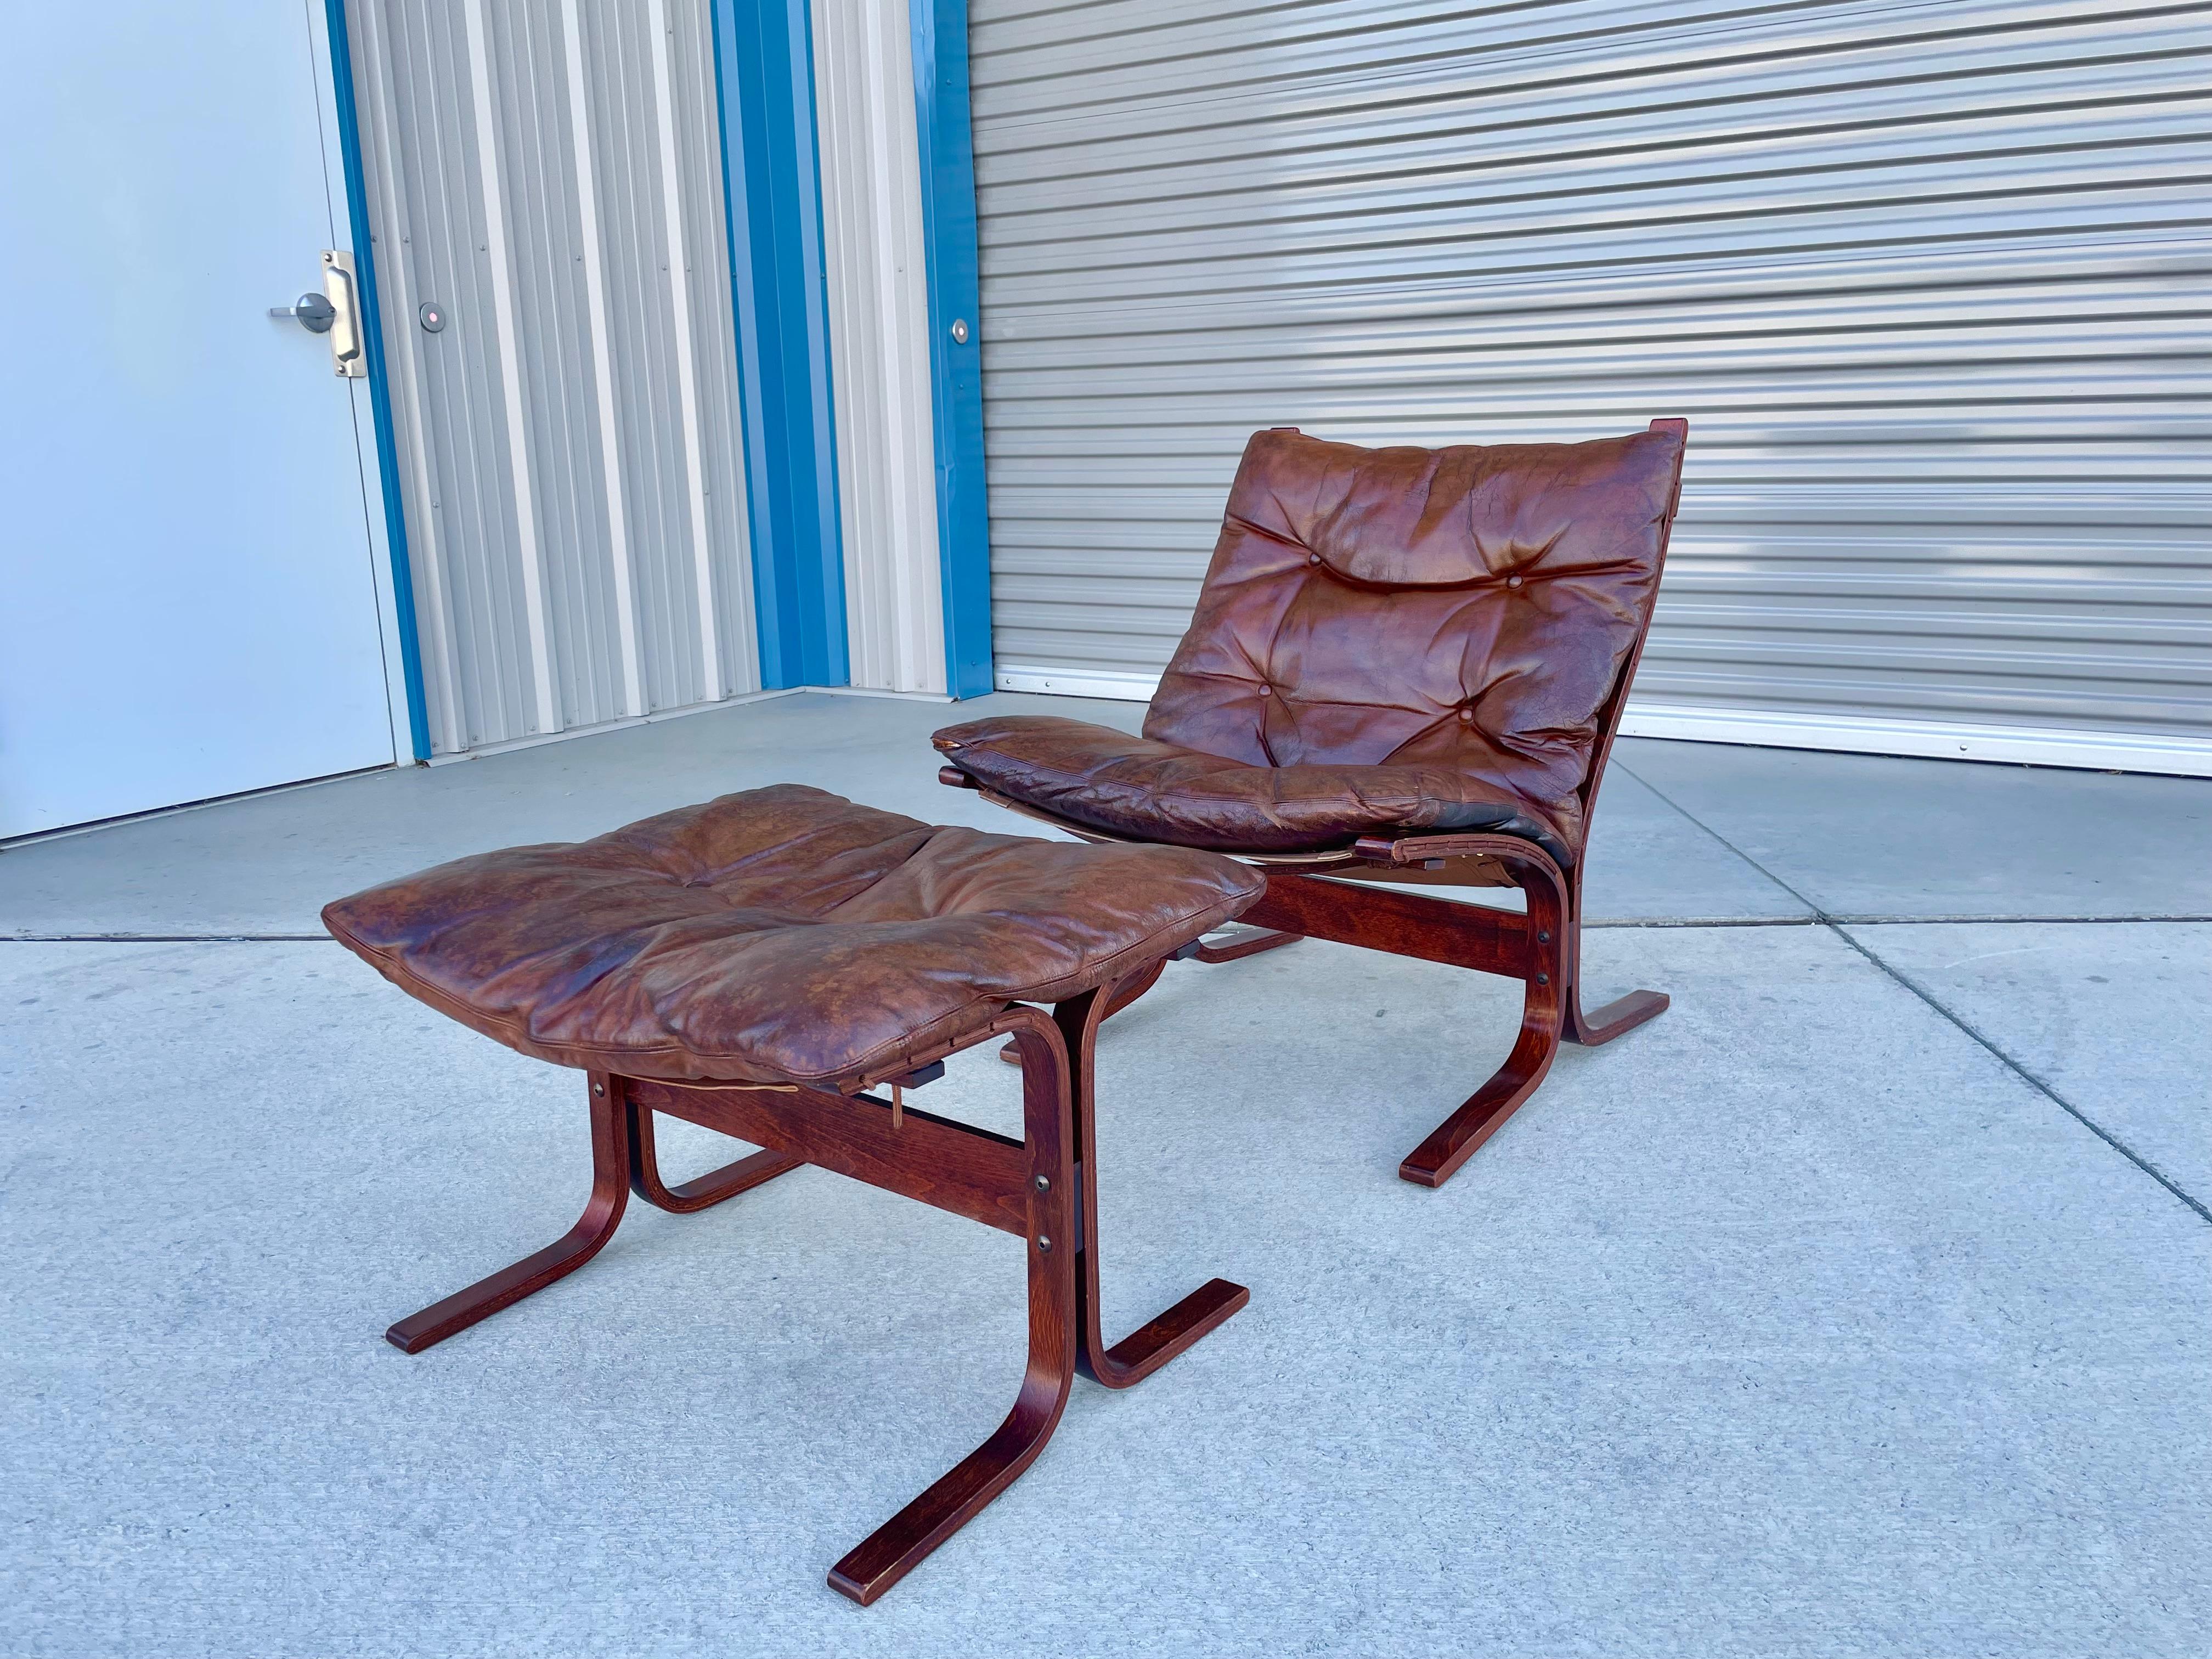 Danish modern lounge chair and ottoman was designed by Ingmar Relling and manufactured by westnofa in Norway circa 1960s. This lounge chair is absolutely stunning, featuring a sleek bentwood frame and a beautiful brown leather upholstery. The